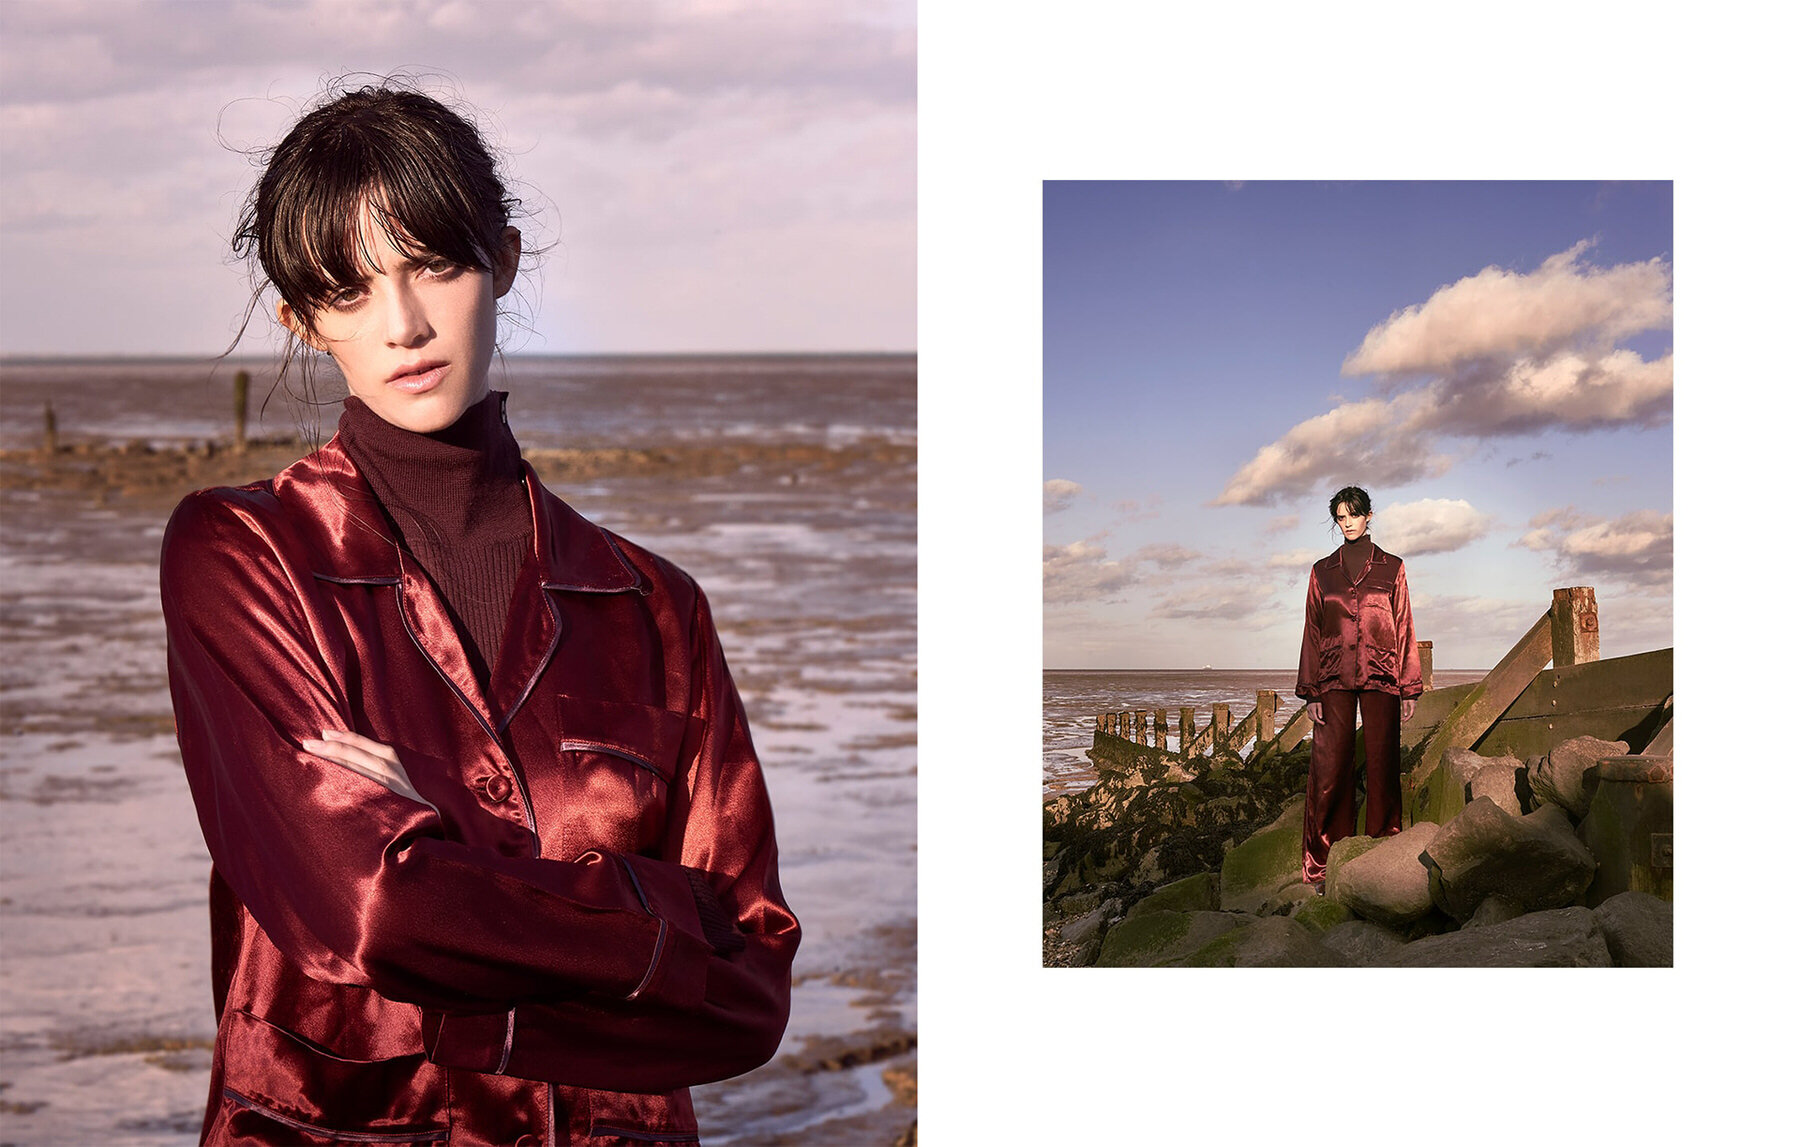  Kingdom of rust   Mitch wears autumnal hues in the Isle of Grain for Mojeh Magazine  Mitch at Select  